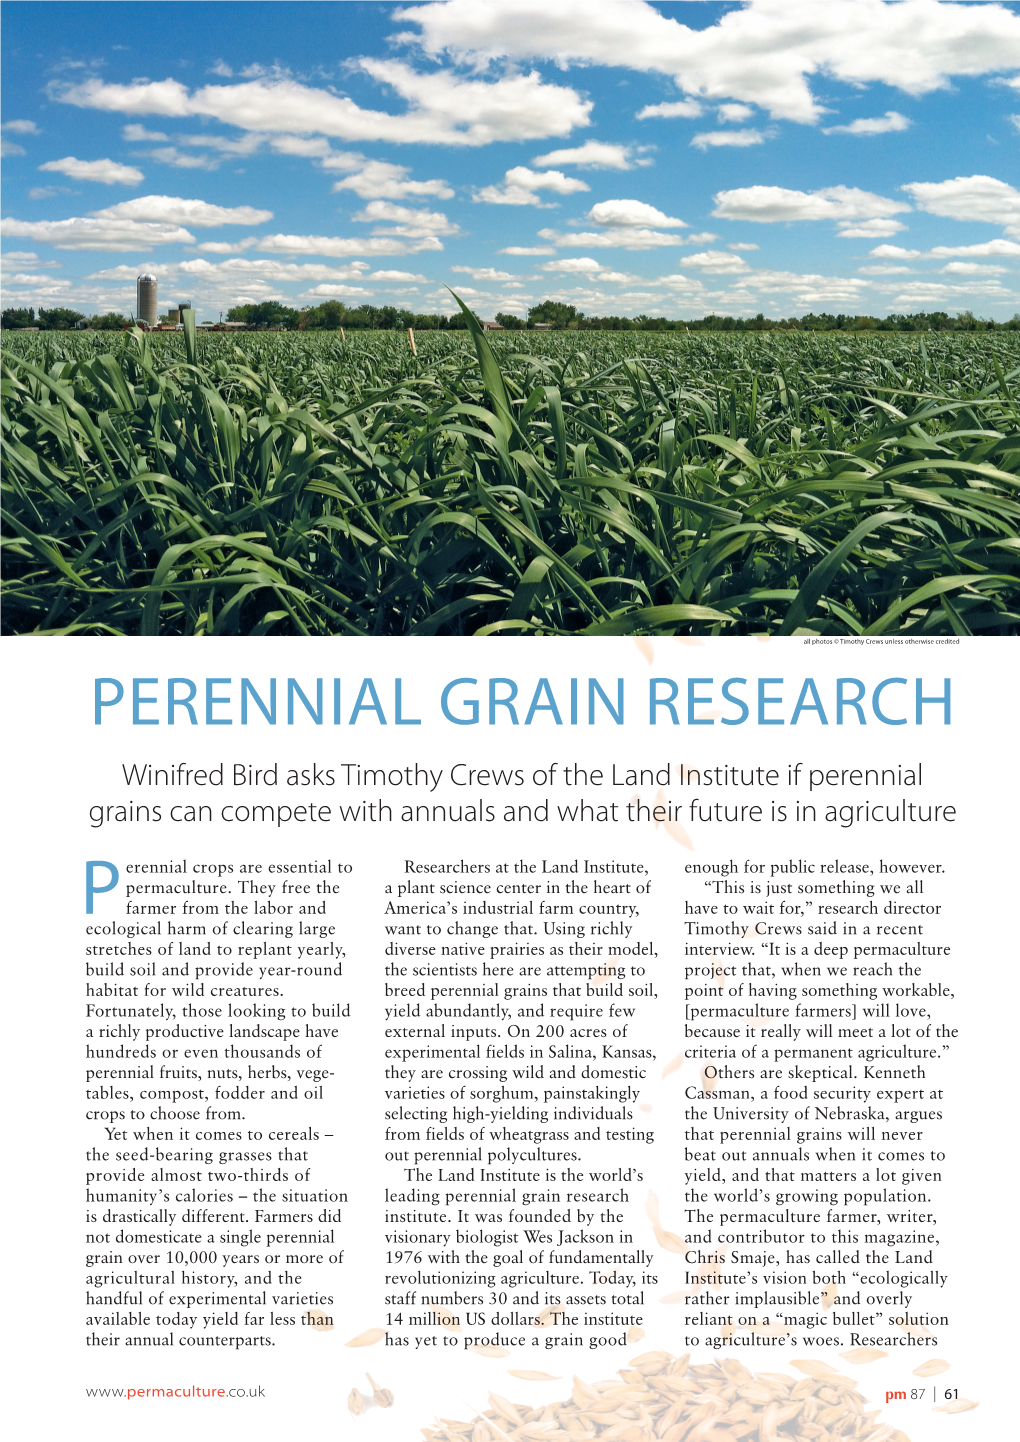 PERENNIAL GRAIN RESEARCH Winifred Bird Asks Timothy Crews of the Land Institute If Perennial Grains Can Compete with Annuals and What Their Future Is in Agriculture